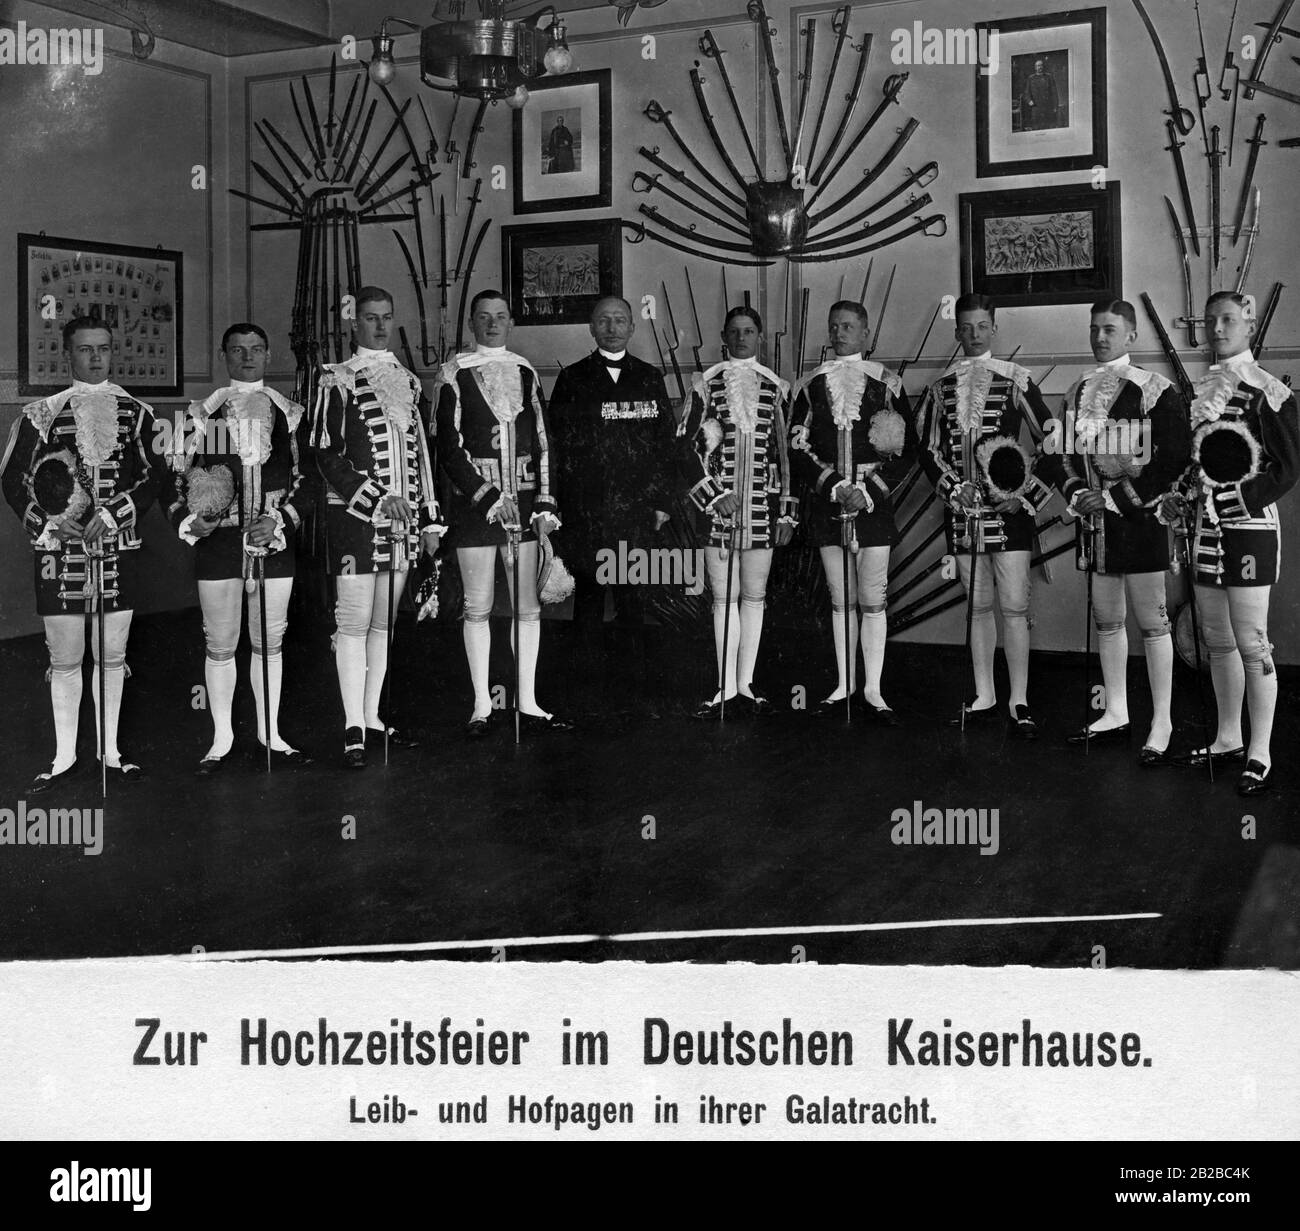 On the occasion of the wedding of the Emperor's daughter Victoria Louise in June 1913 to a Duke of Brunswick, the bodyguards and court pages stand by in gala dress. This was mostly done by the upper classes of the Prussian Hauptkadettenanstalt (main cadet school) in Berlin-Lichterfelde. Stock Photo